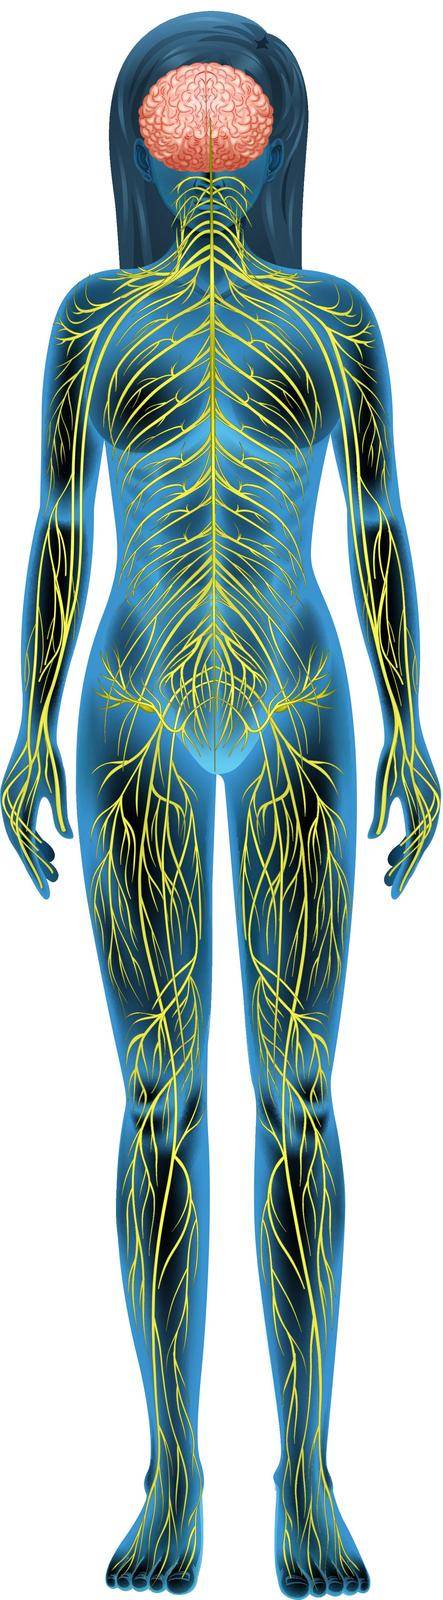 Human nervous system by iimages